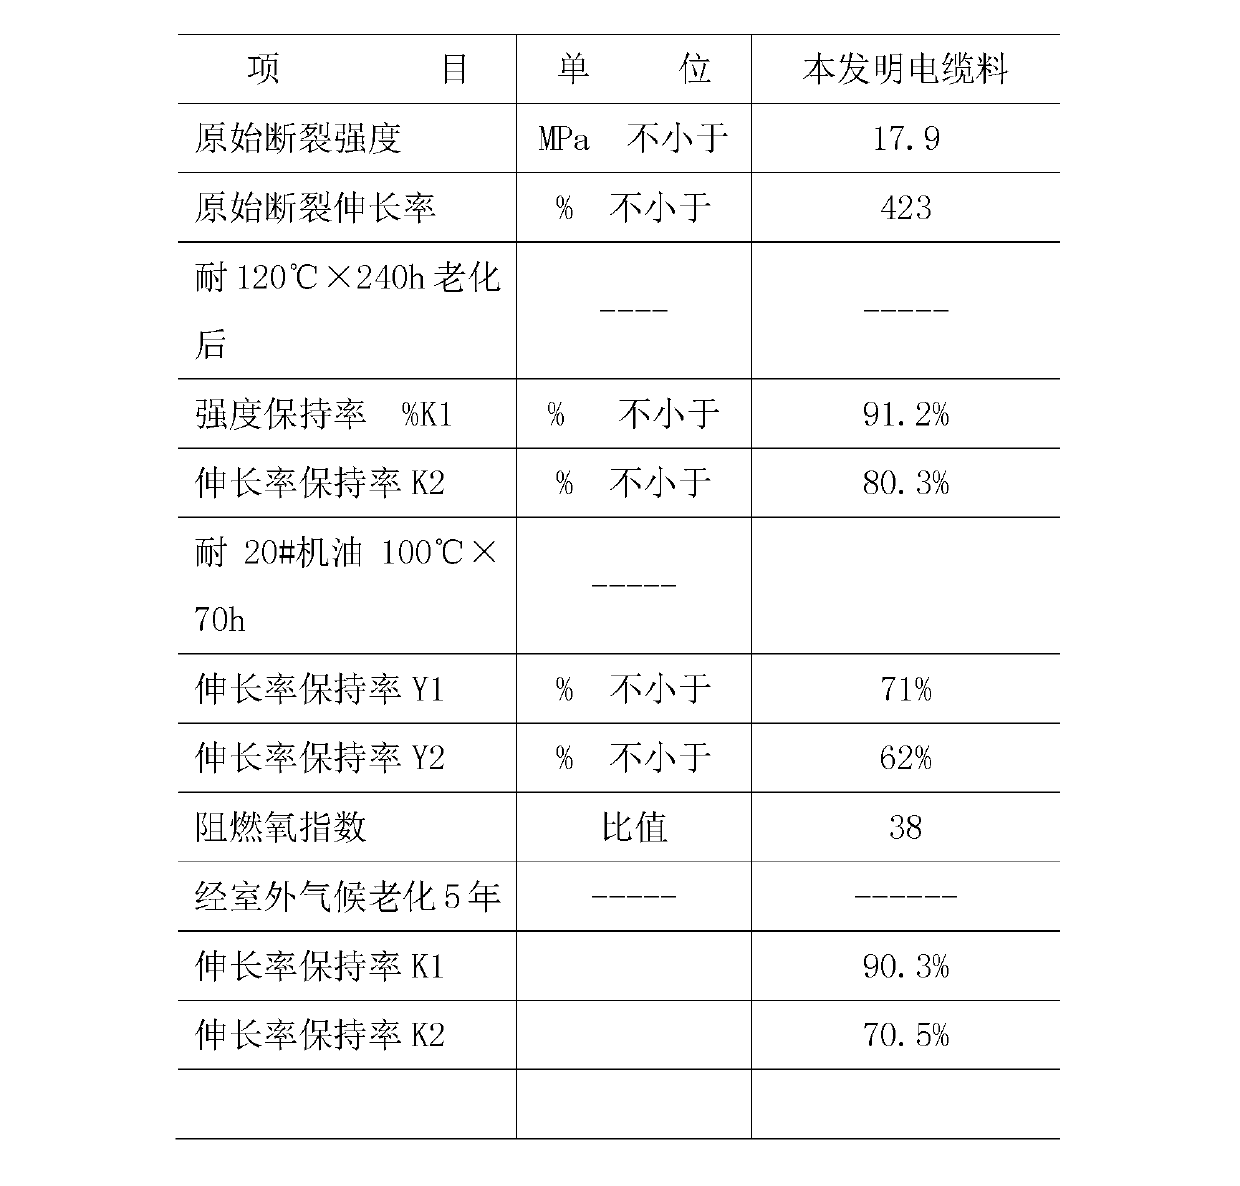 Environmental-friendly termite-resistant cable sheath insulating material and method for preparing same